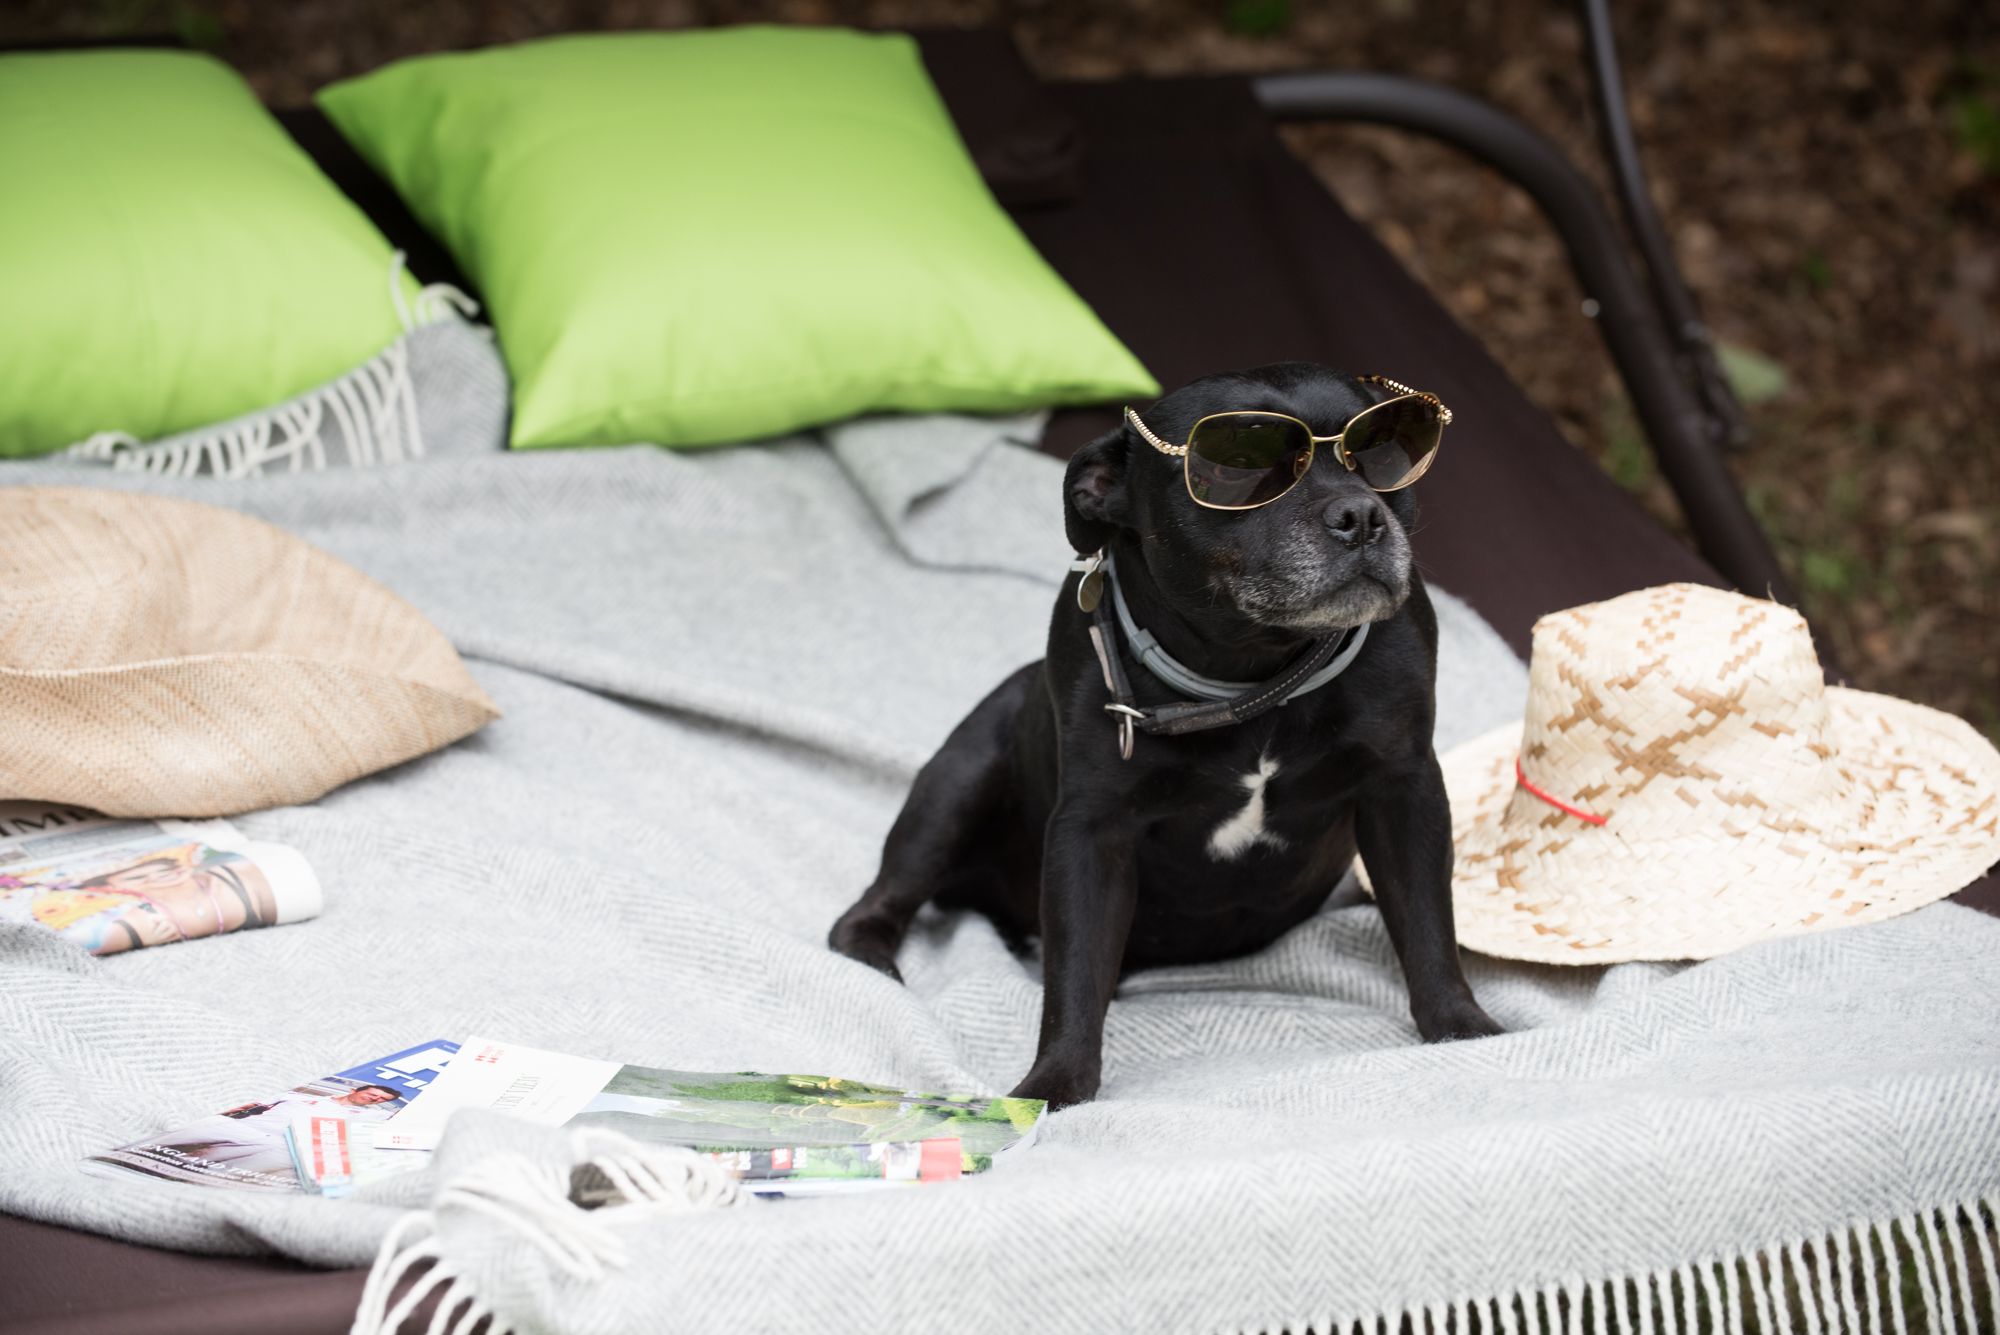 Luxury mini-breaks where your dogs are the guest of honour